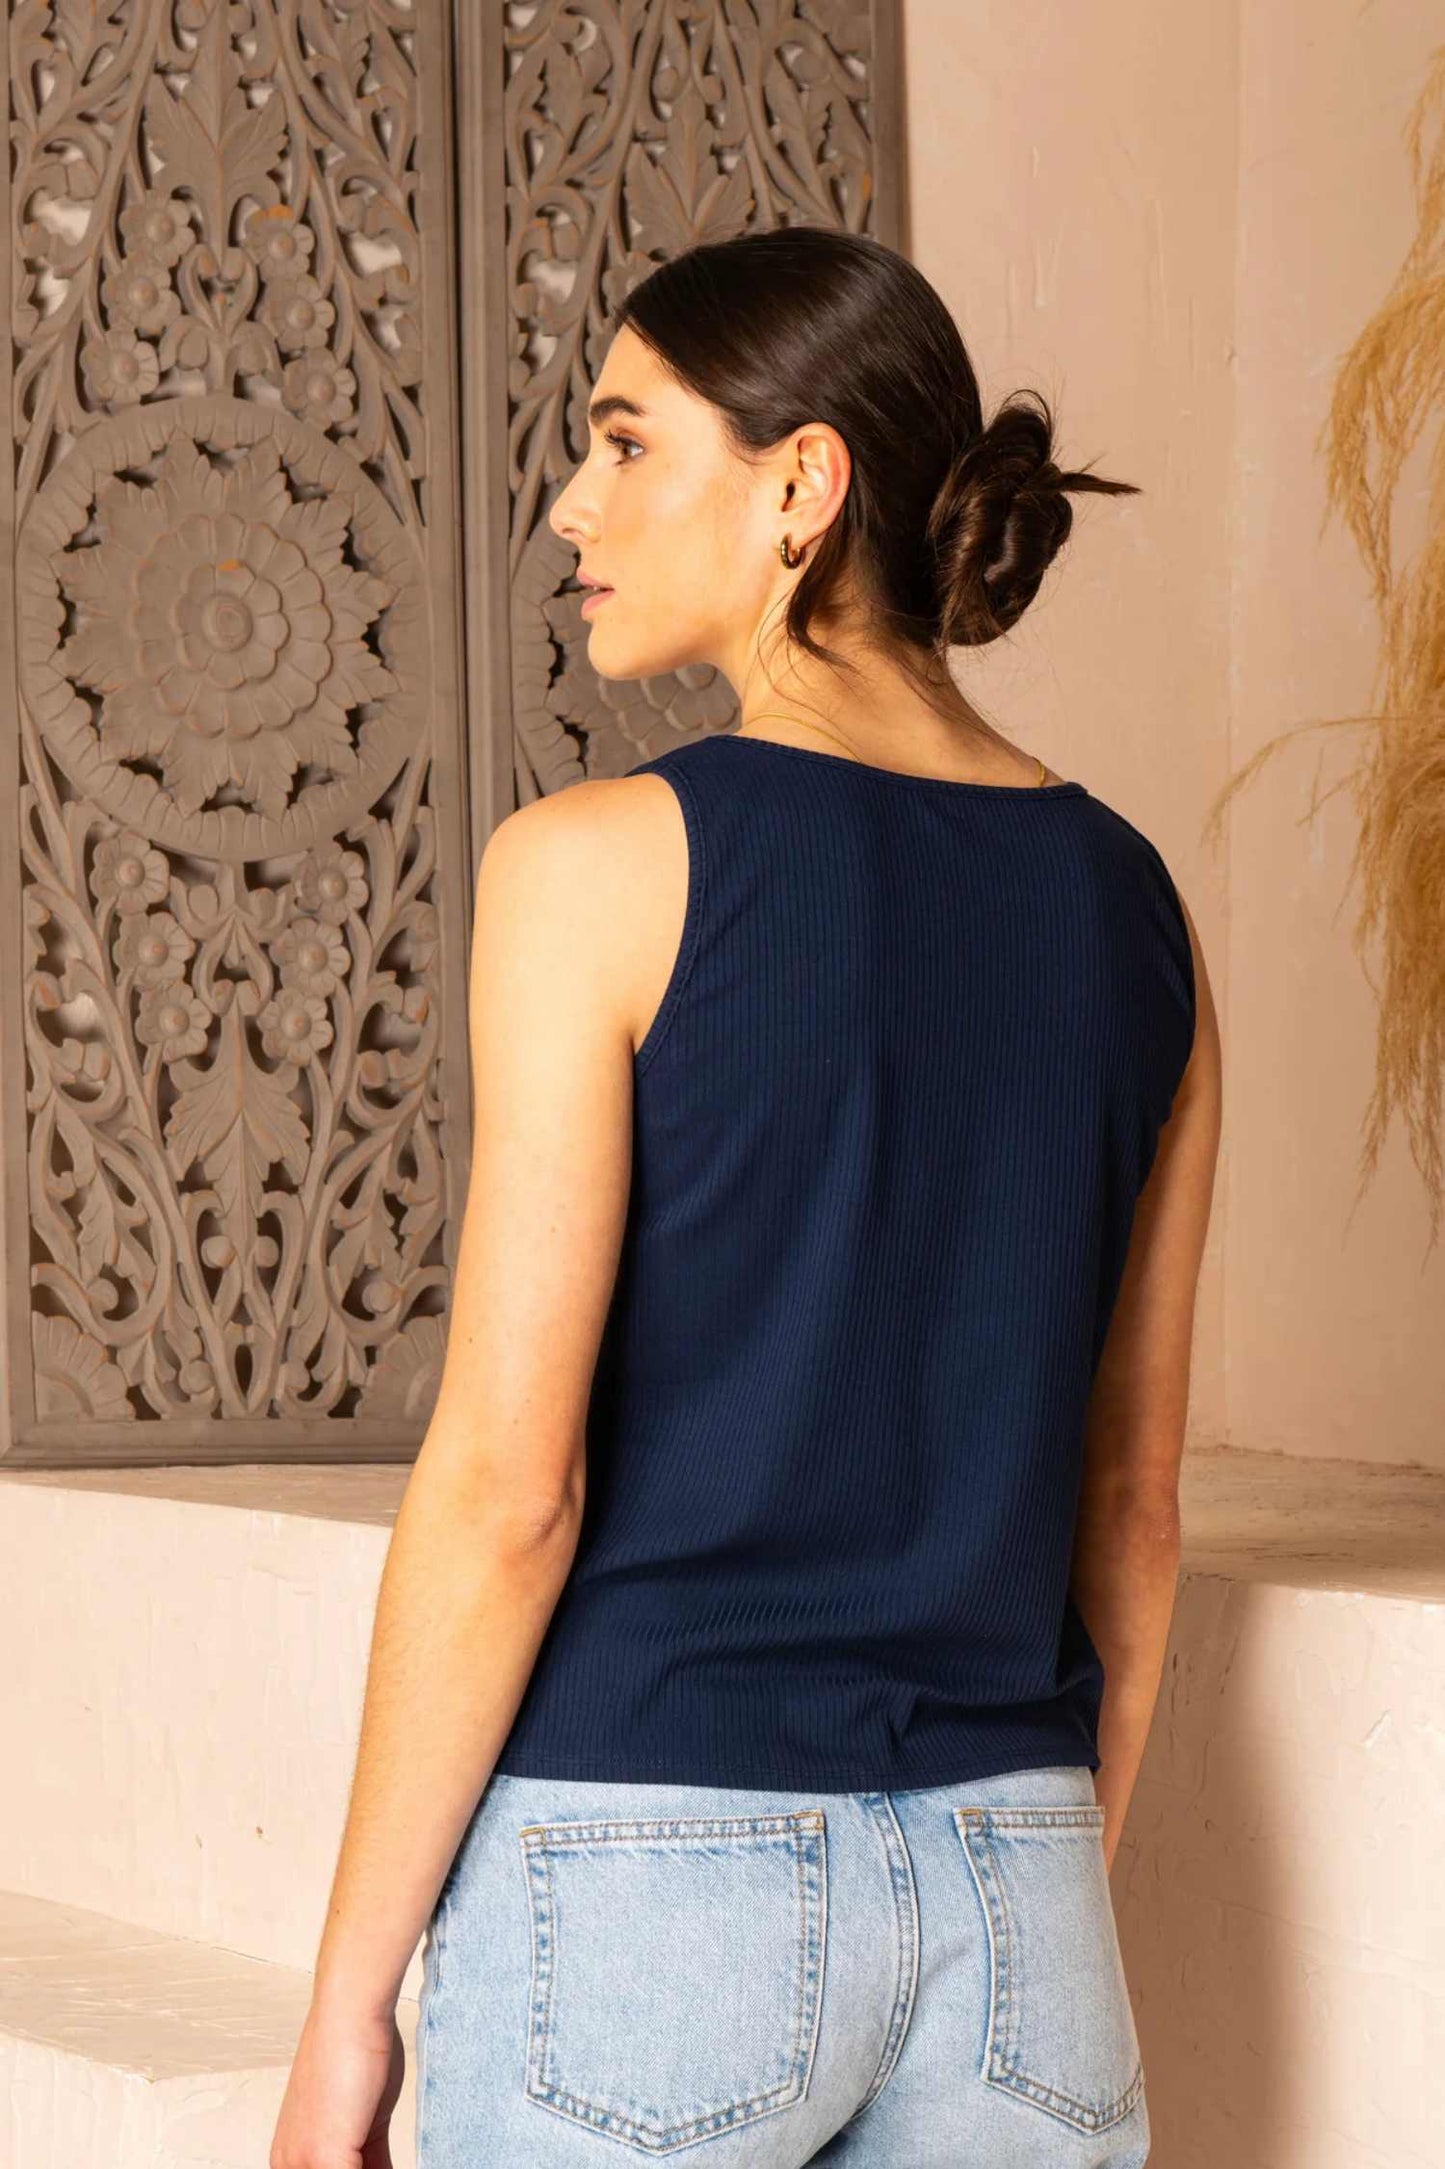 Back view close-up photo of a woman wearing the Aquarelle Cami by Cherry Bobin in Navy